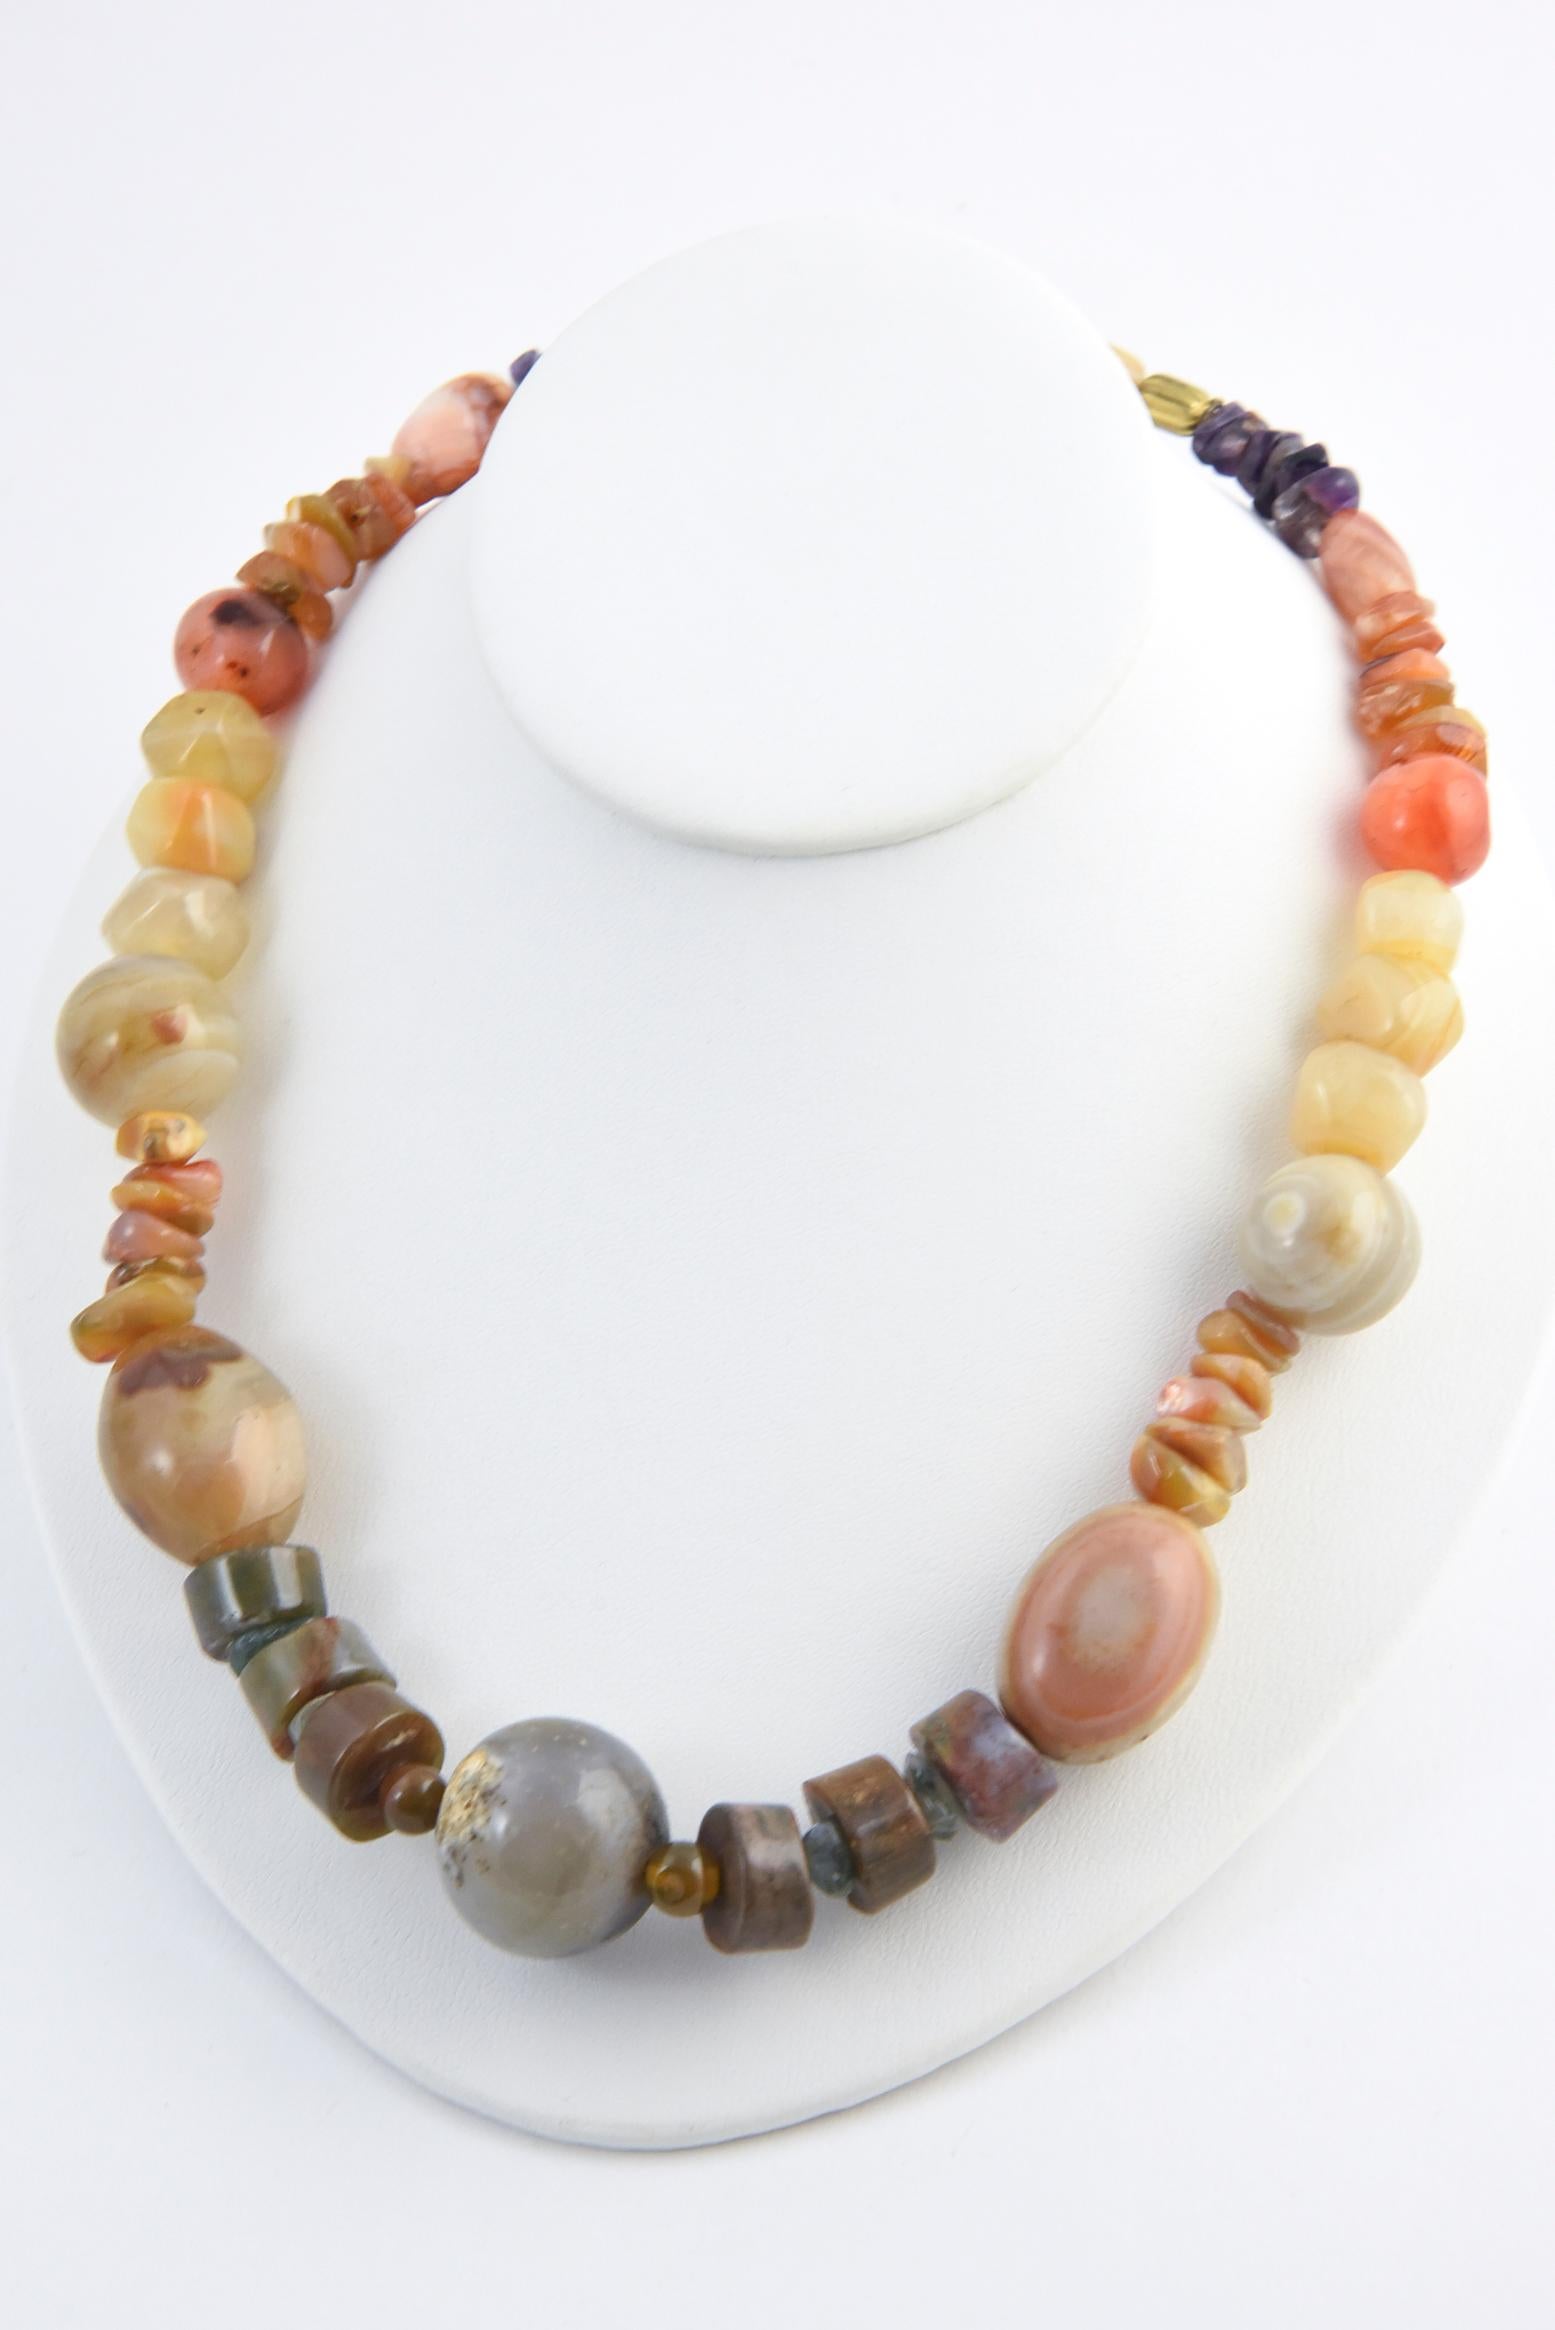 Multicolored Agate and Amethyst Bead Necklace For Sale 2